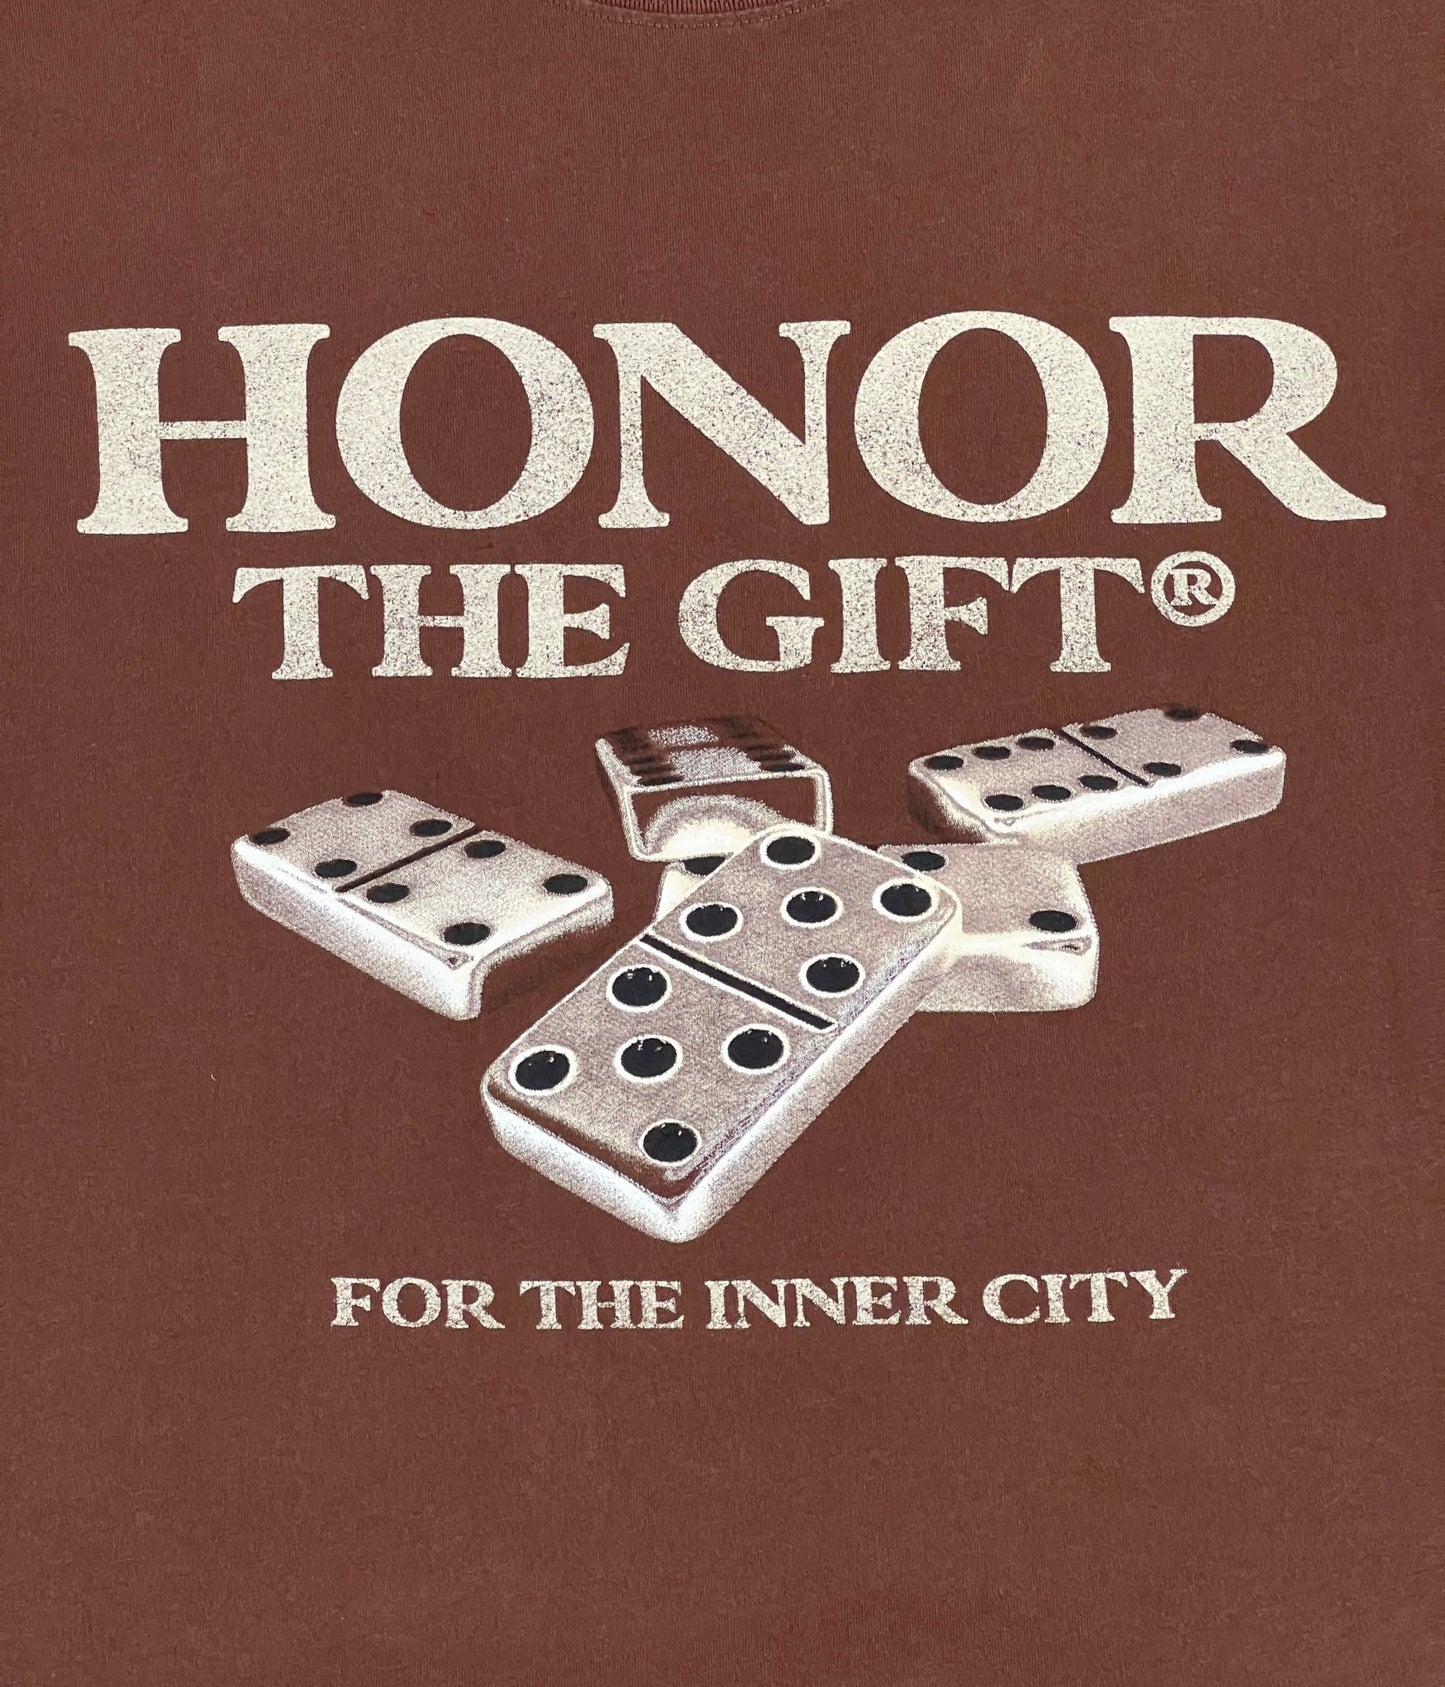 Probus HONOR THE GIFT DOMINOS TEE BROWN S